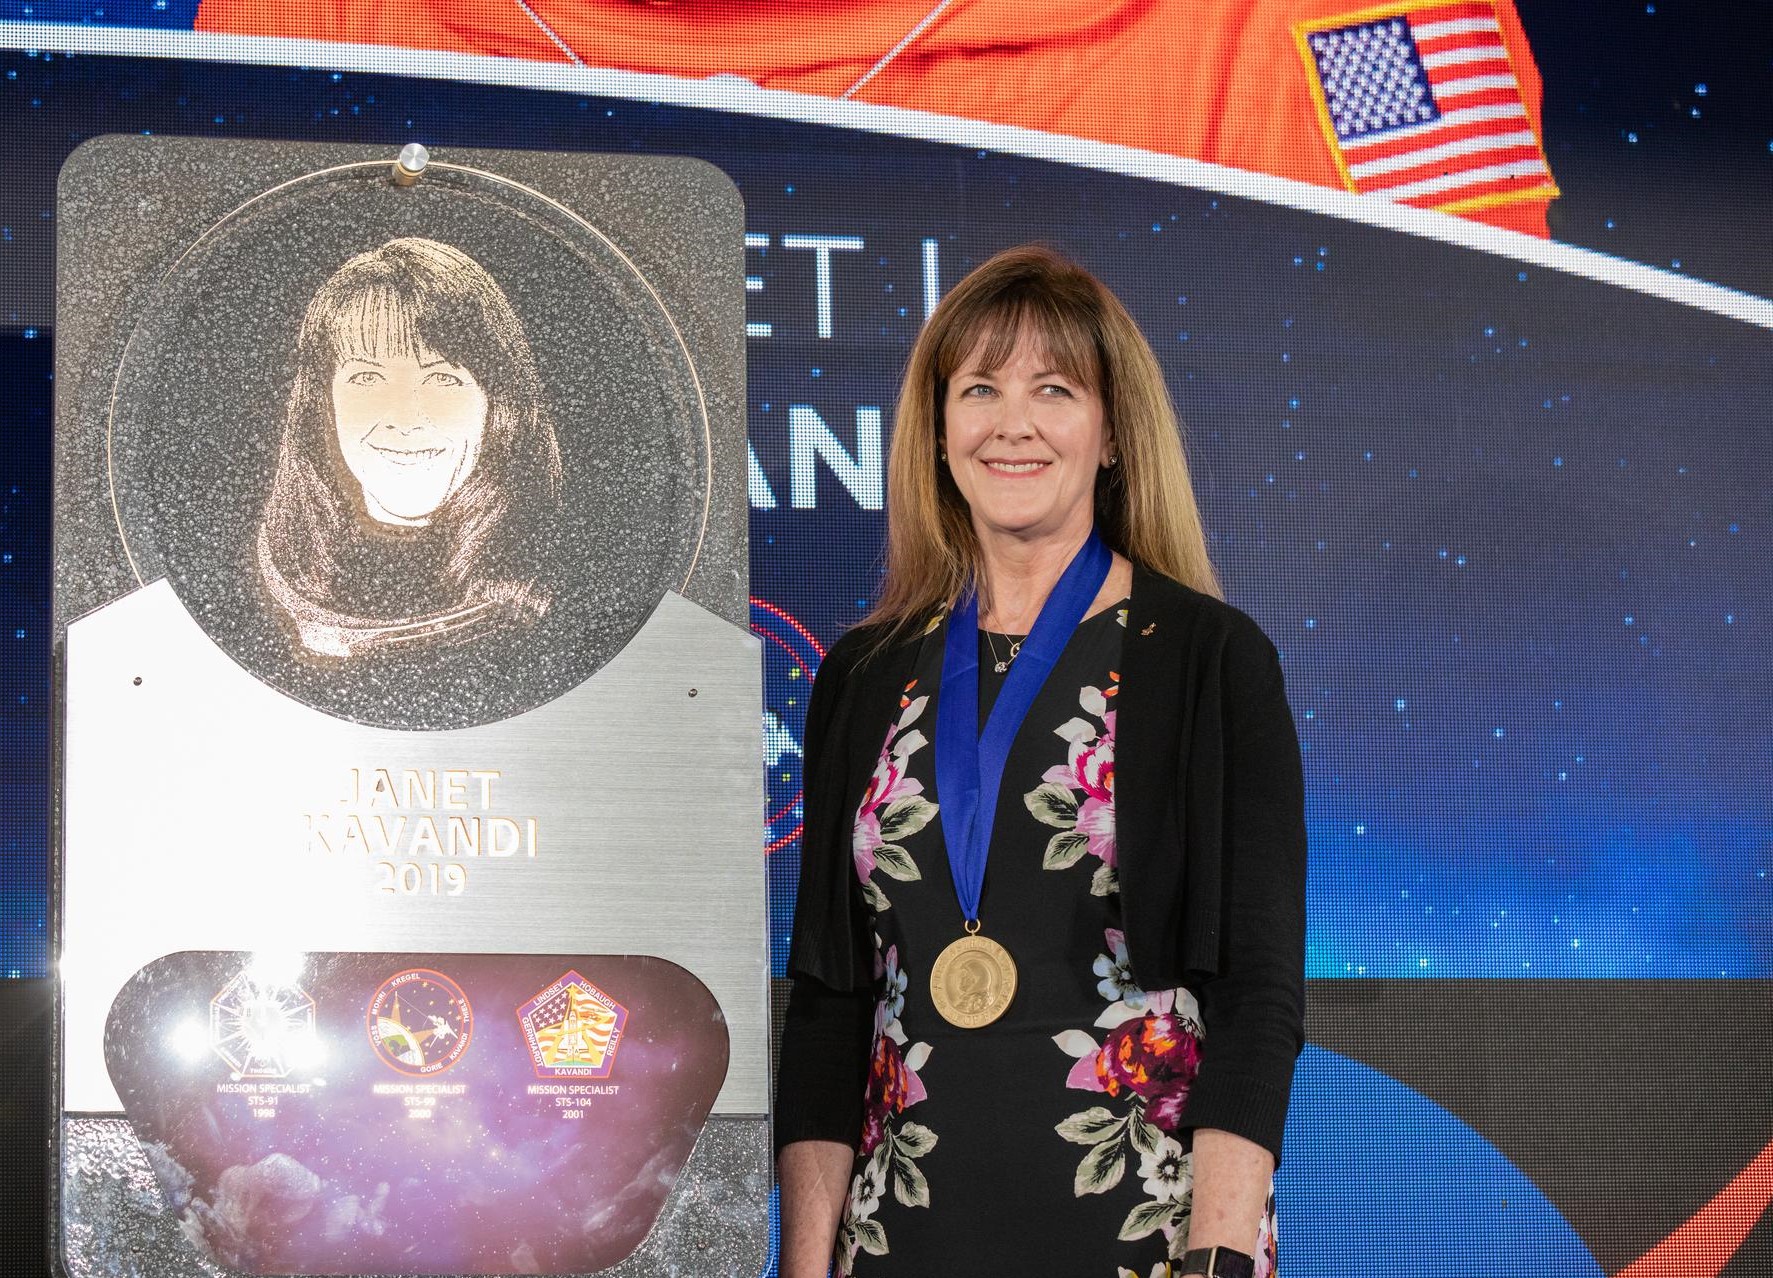 Janet Kavandi is inducted April 6 into the U.S. Astronaut Hall of Fame during a ceremony.